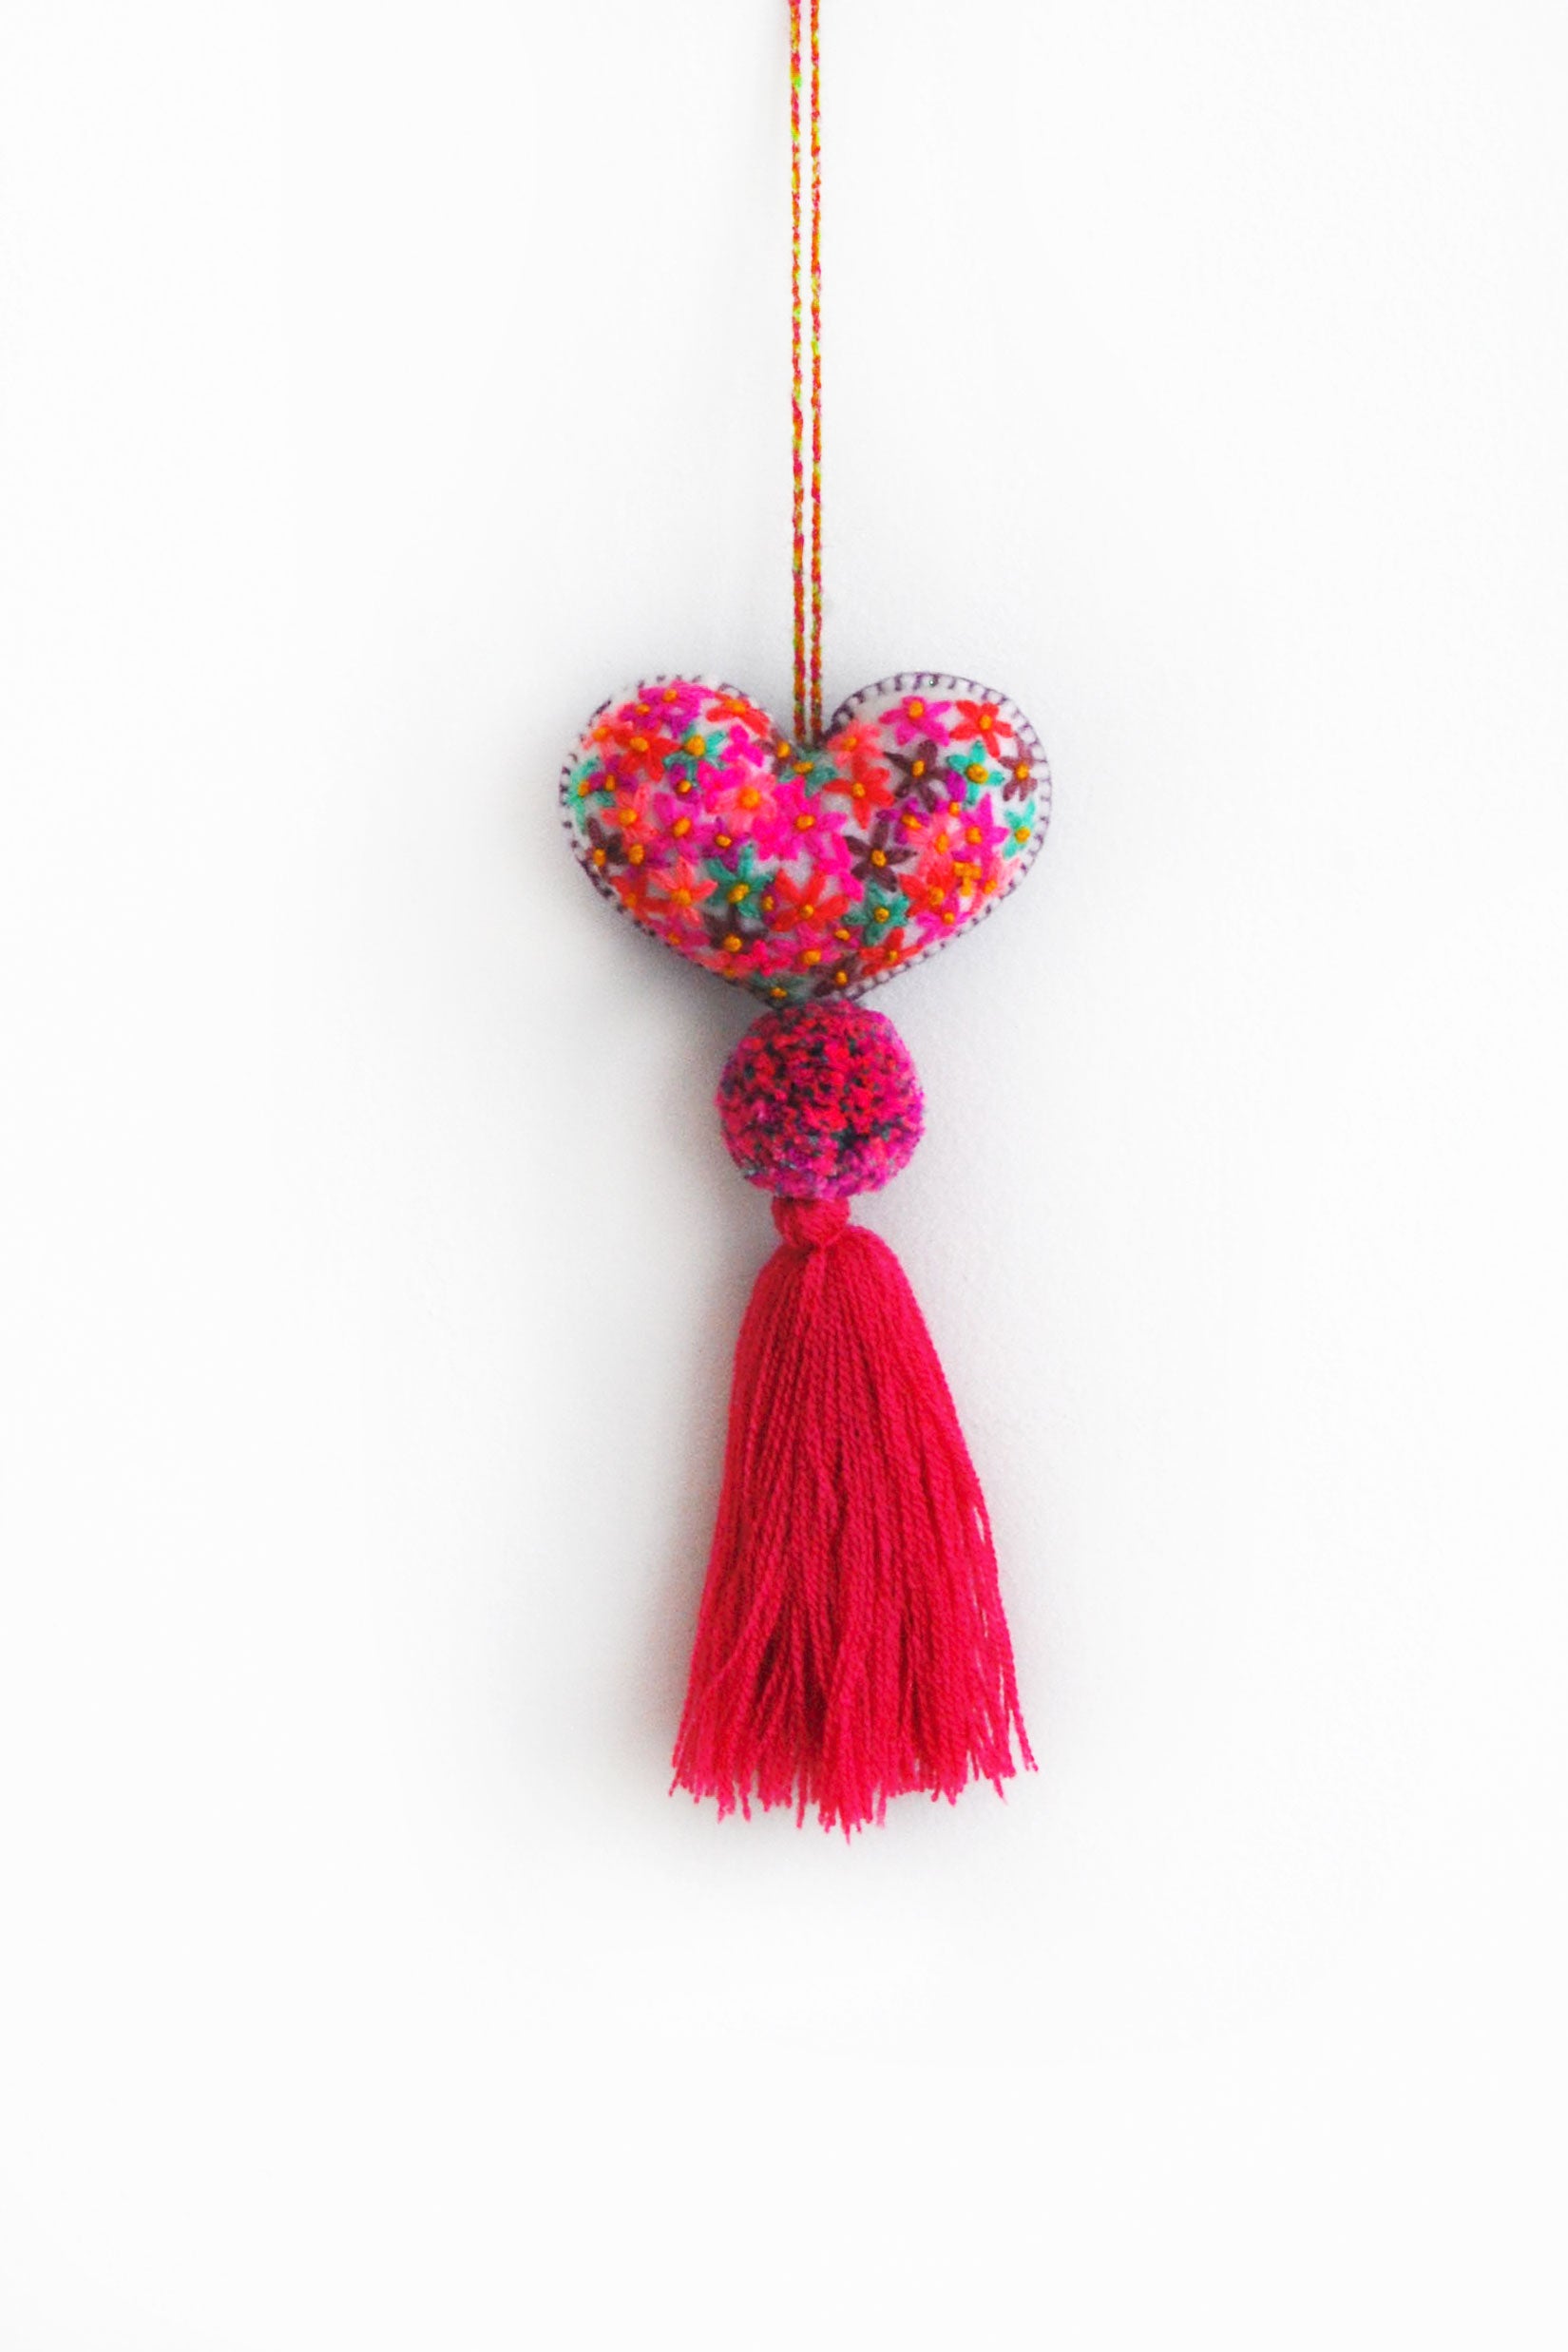 A colorful plush felt heart adorned with flower embroidery attached by multicolor speckled pom poms to a tassel in a bright pink color. The heart is hanging from a string attached to the top of it.